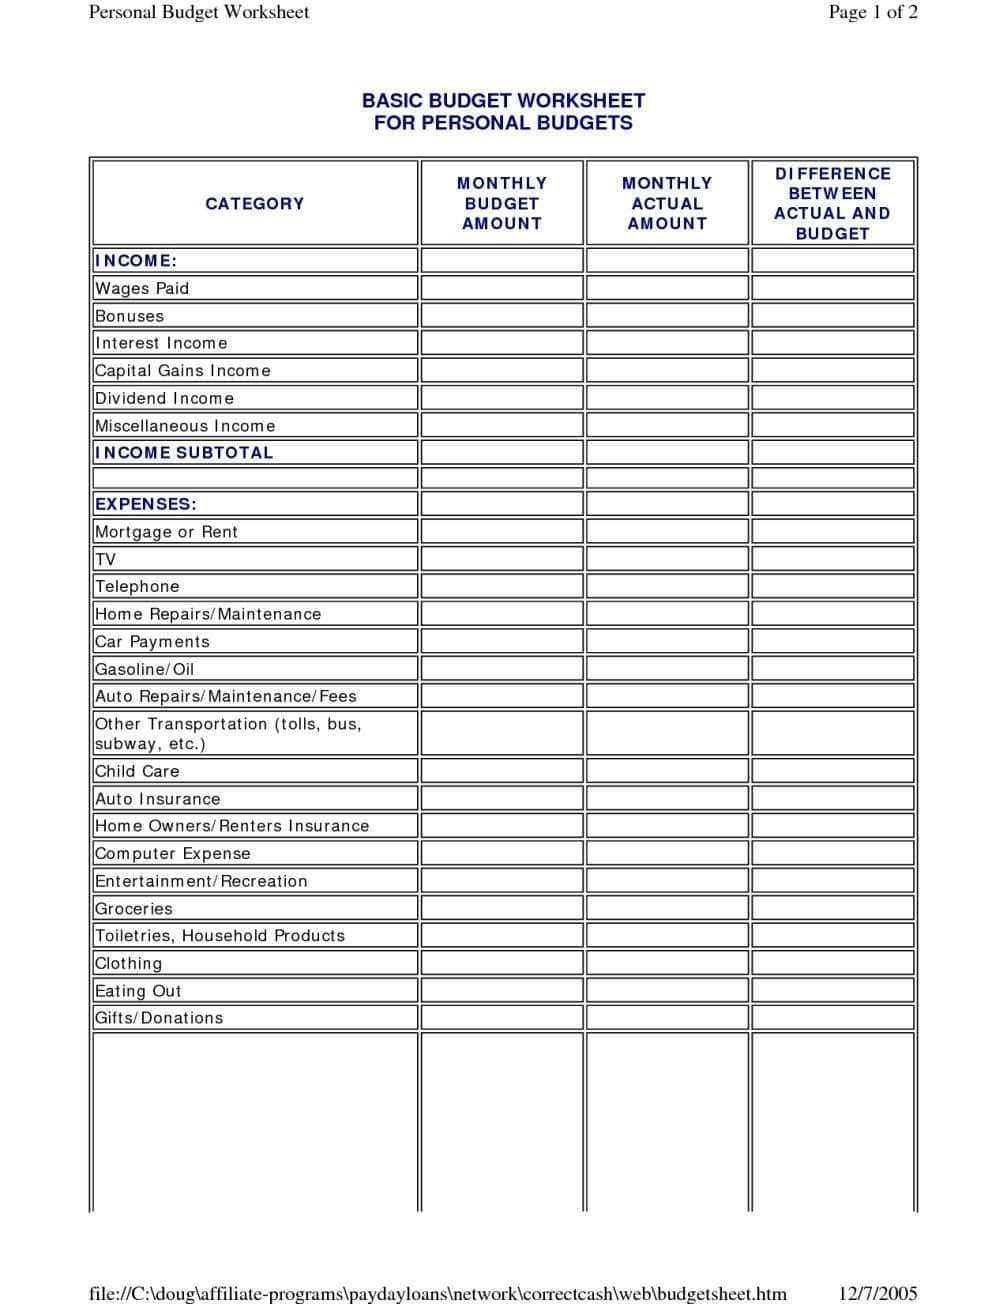 Contents Insurance Checklist Spreadsheet throughout Personal Property Inventory List Template And Contents Insurance